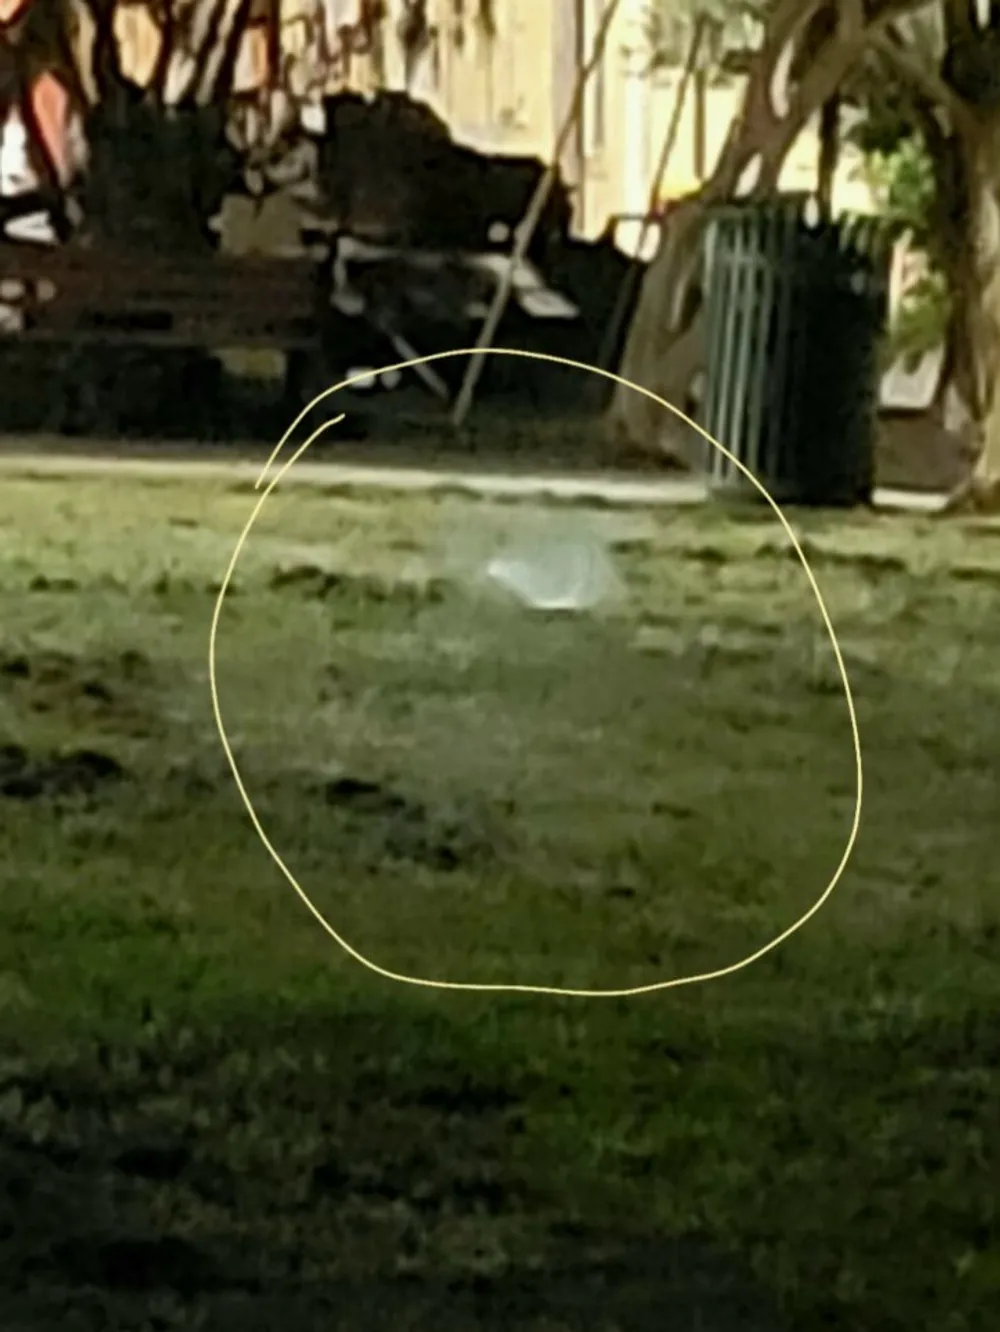 The image shows a blurry outdoor scene with a grassy area encircled in yellow possibly highlighting an anomaly or point of interest